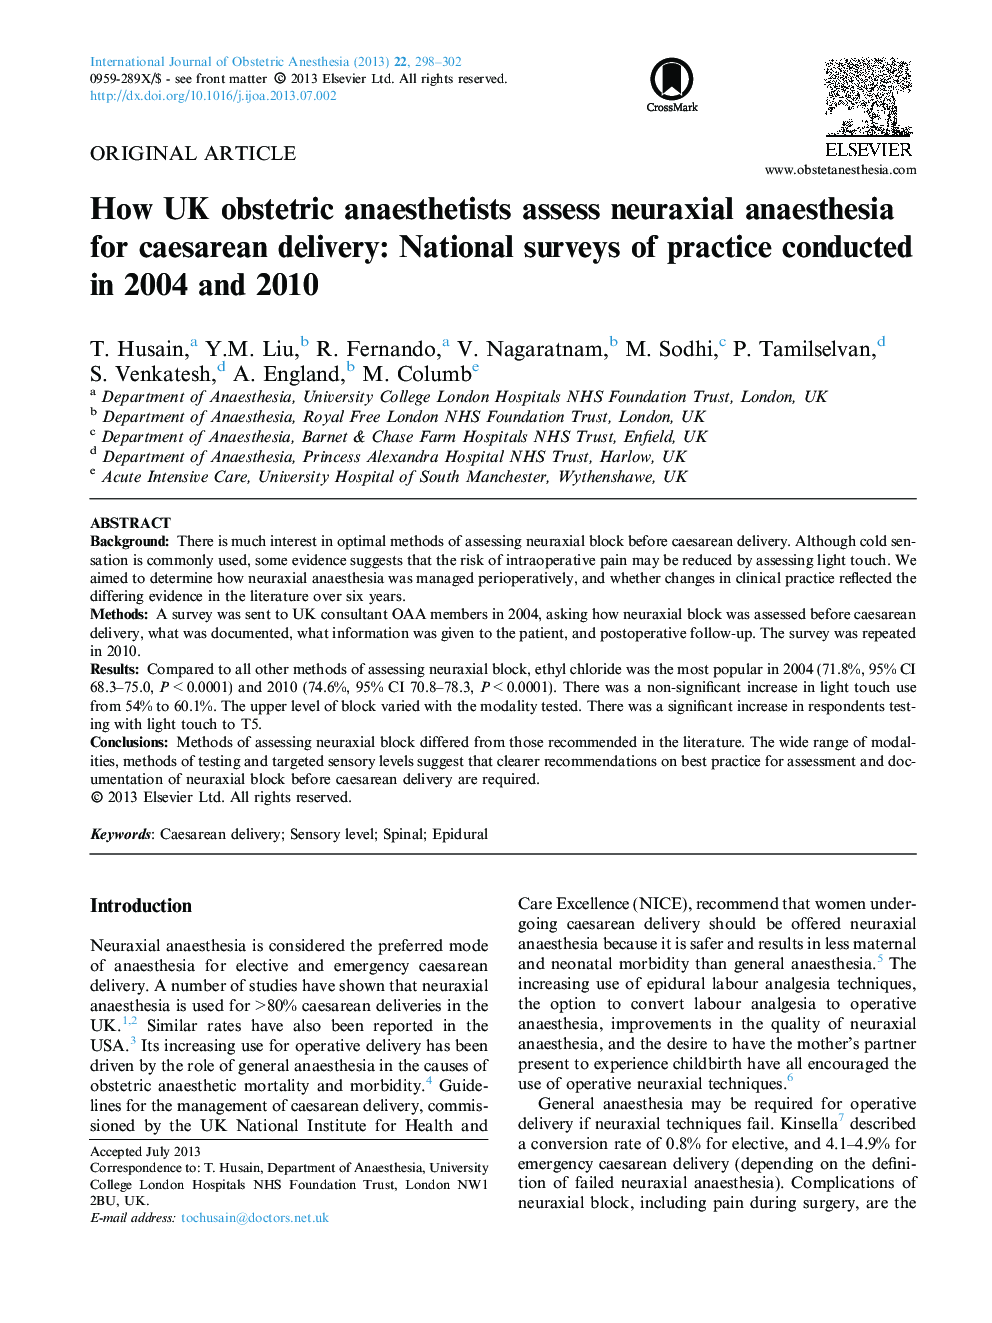 How UK obstetric anaesthetists assess neuraxial anaesthesia for caesarean delivery: National surveys of practice conducted in 2004 and 2010